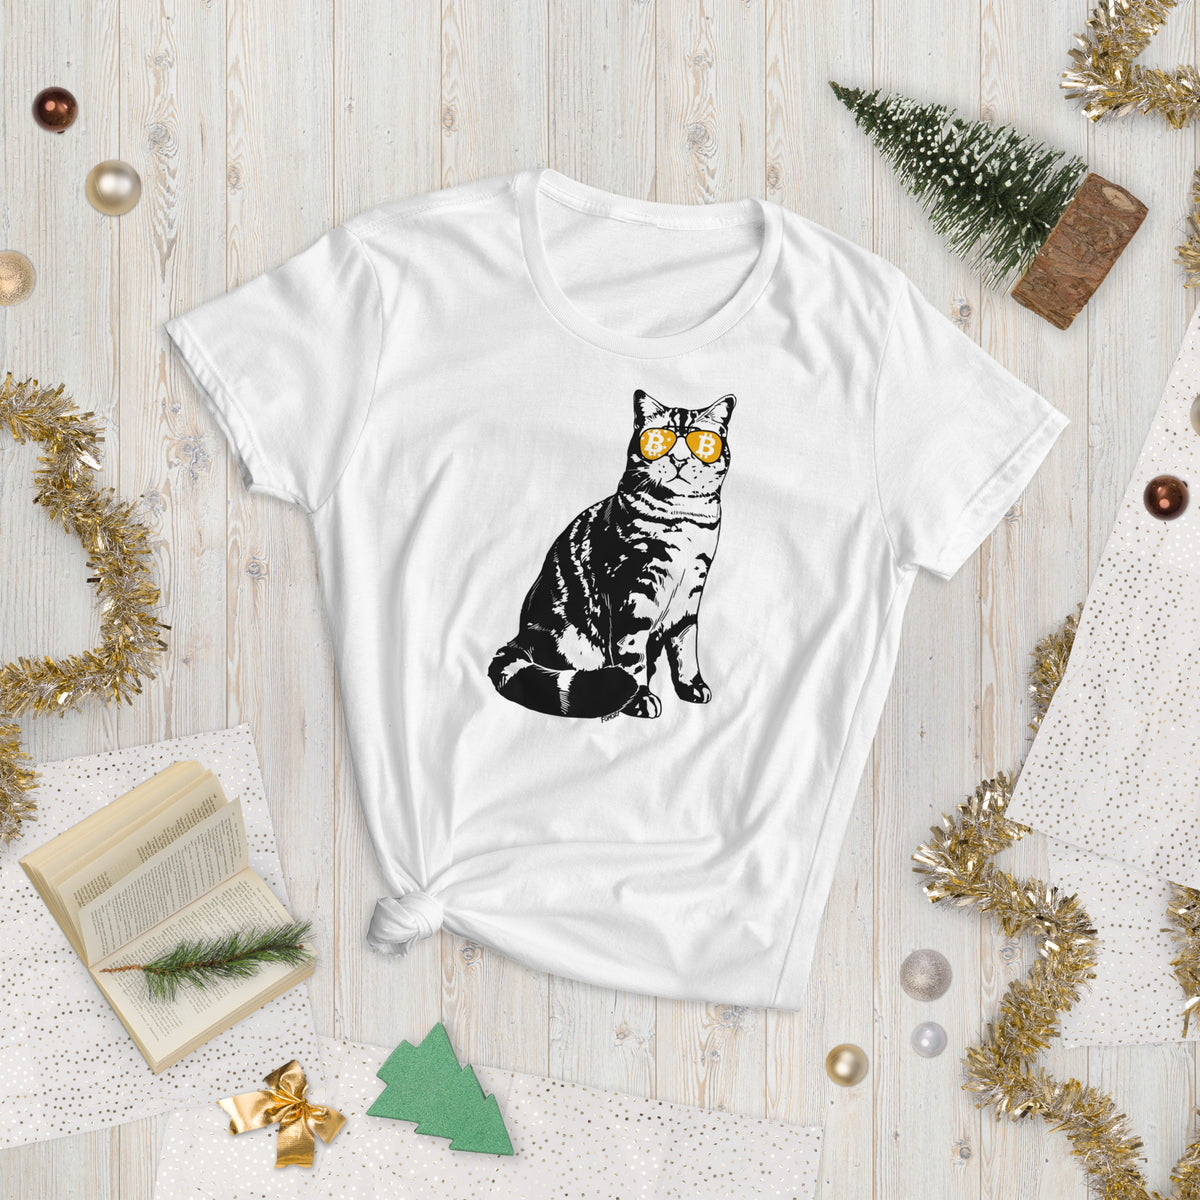 Bitcoin Is For The Cats Women's Fashion Fit T-Shirt - fomo21